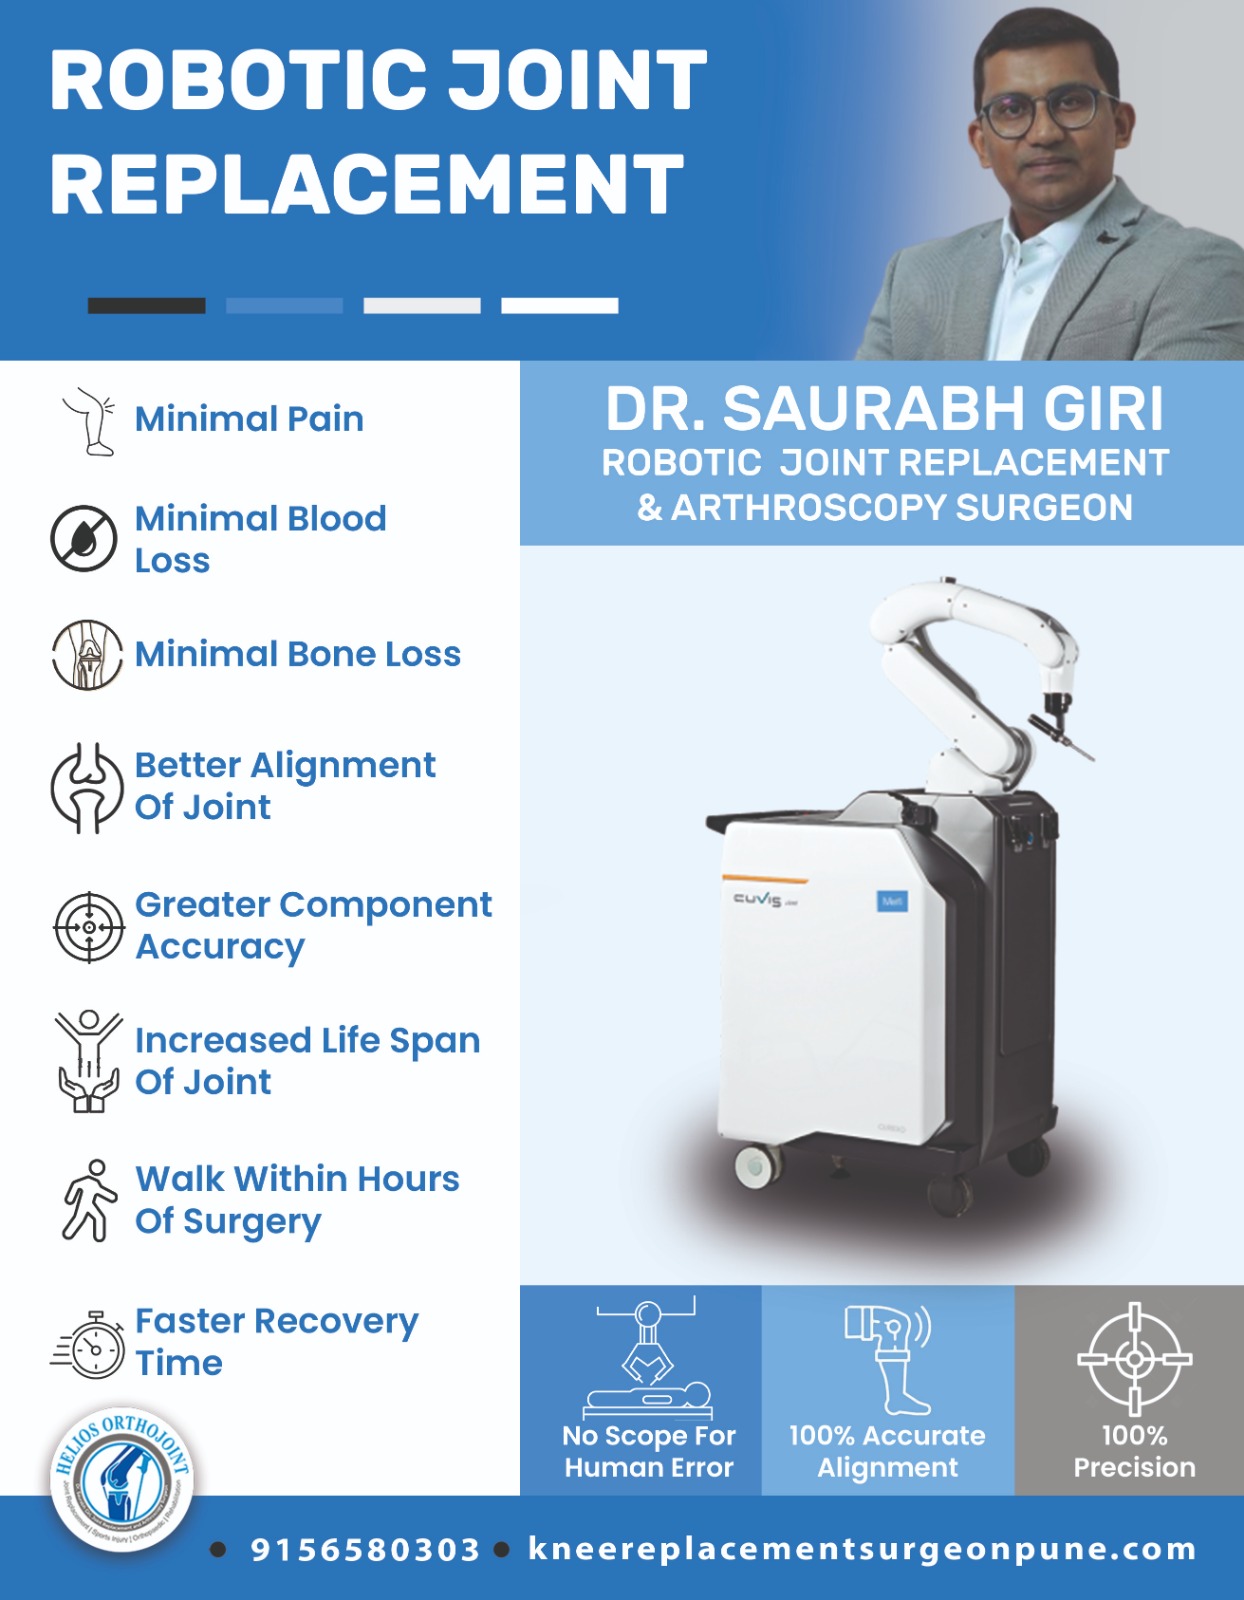 Dr. Saurabh Giri Introduced India’s First Revolutionary, Fully Autonomous AI-Based Robotic Knee Replacement System at Helios Orthojoint in Pune